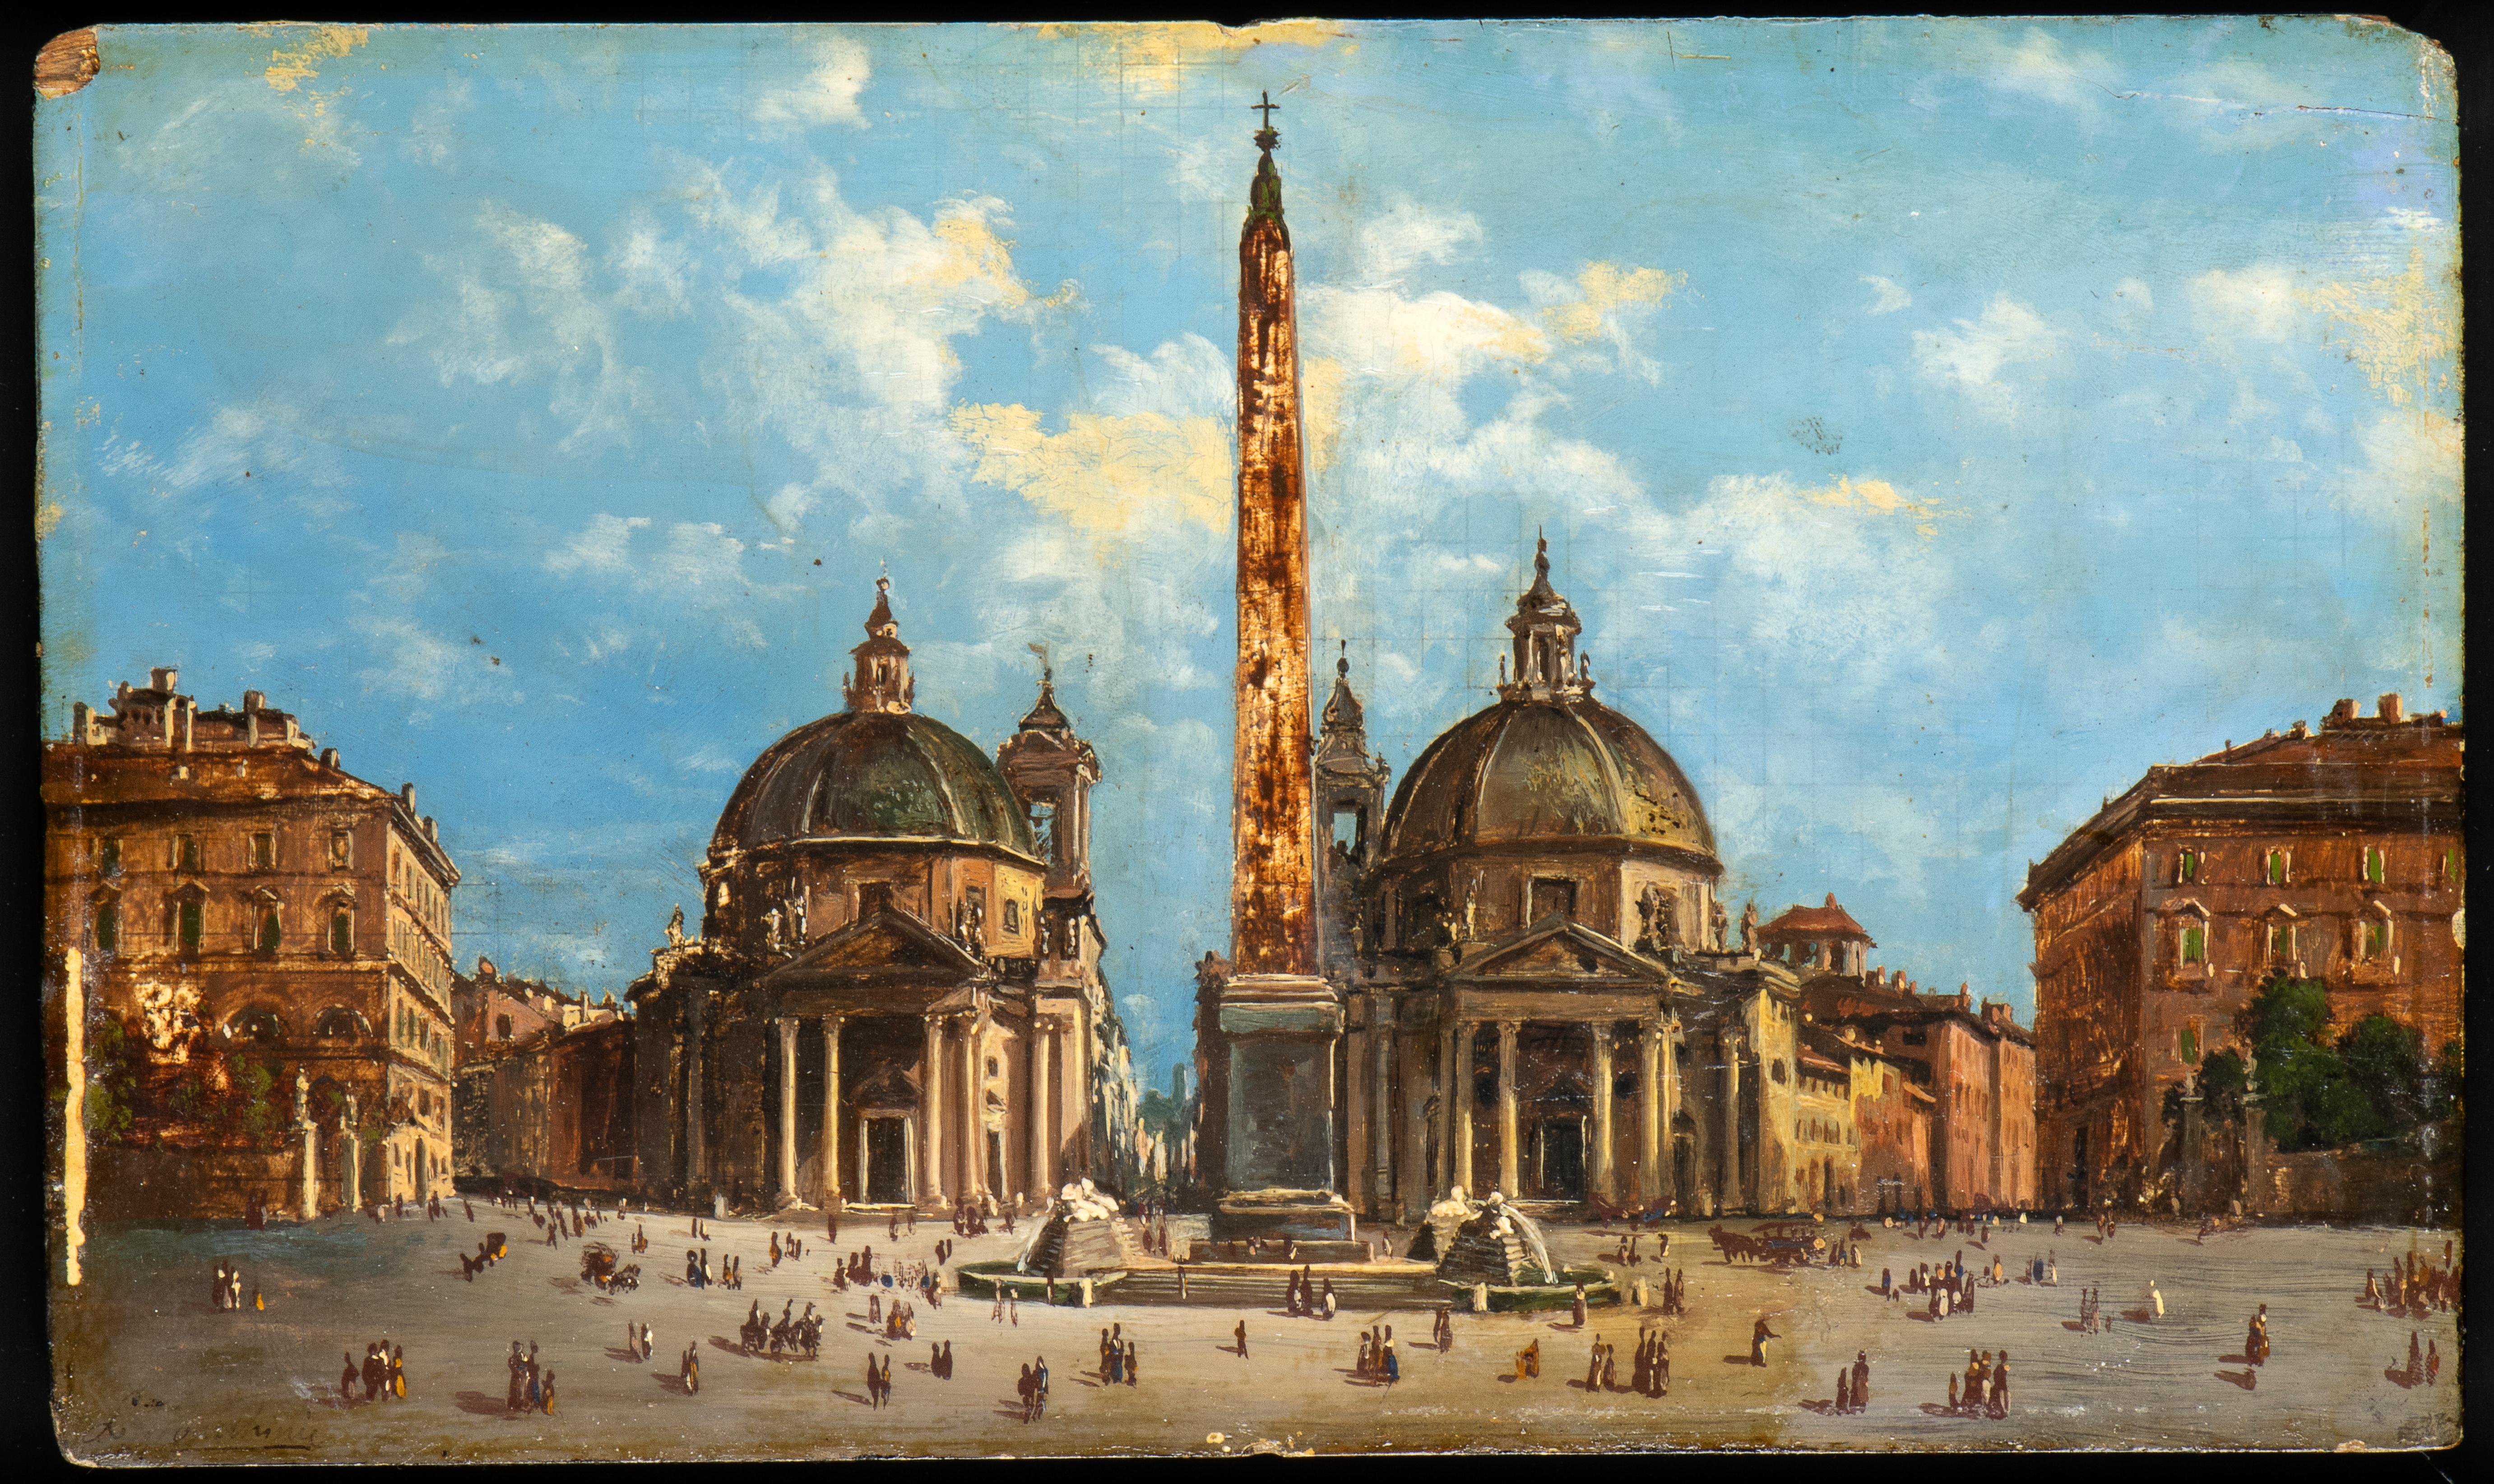 Elaborately framed, isolated in black modern frames this painting represent a typically daily scene of Rome at the end of the 19th century in a perfect grand tour style present a  view of Piazza del Popolo with the obelisk and the twin Churchs,